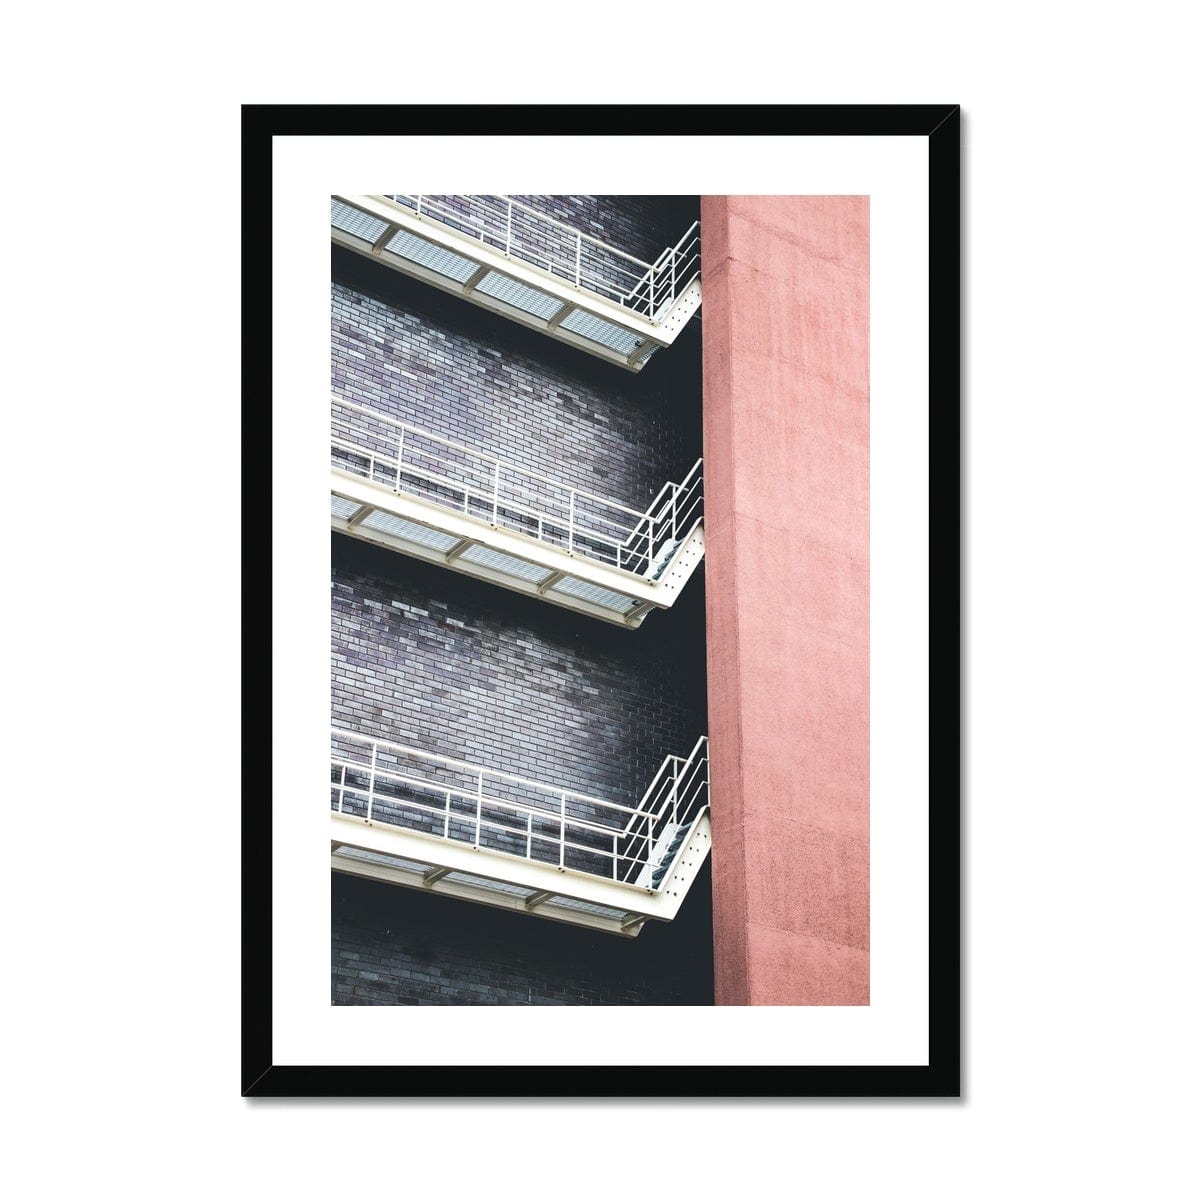 Adam Davies Framed 6"x8" / Black Frame The Way Out Architecture Abstract Framed Print